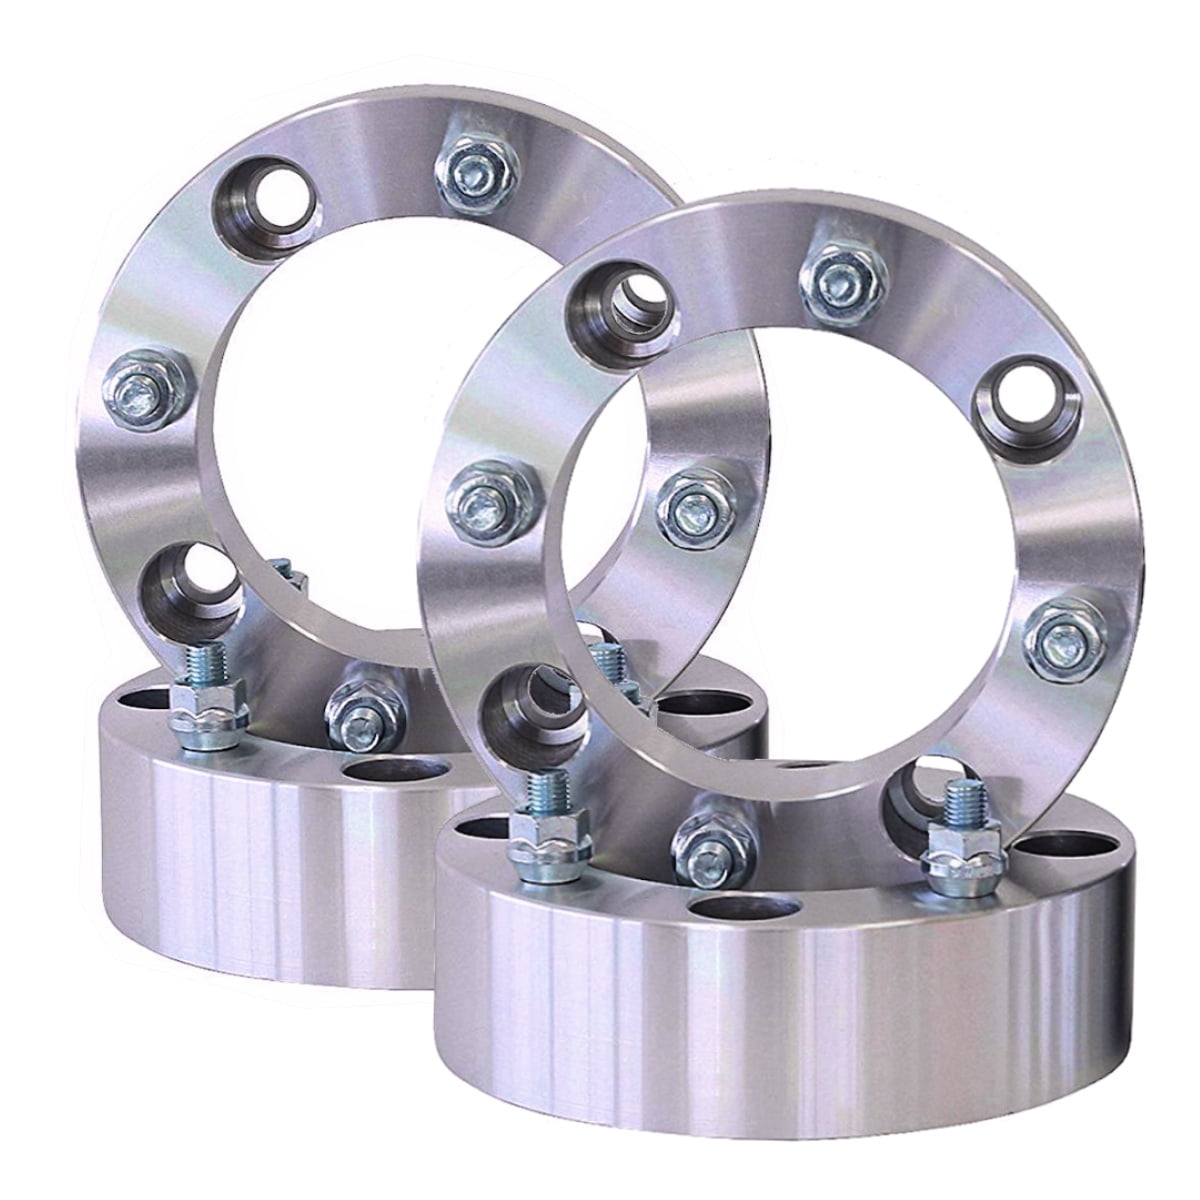 3/8x24 Studs, Cone Seat Nuts | 4/156 Silver V3 50mm See Description for Year/Model Compatible with various Polaris & Kawasaki ATVs UTVs Pack of 4 2 Thick 4x156 Wheel Spacers RockTrix 